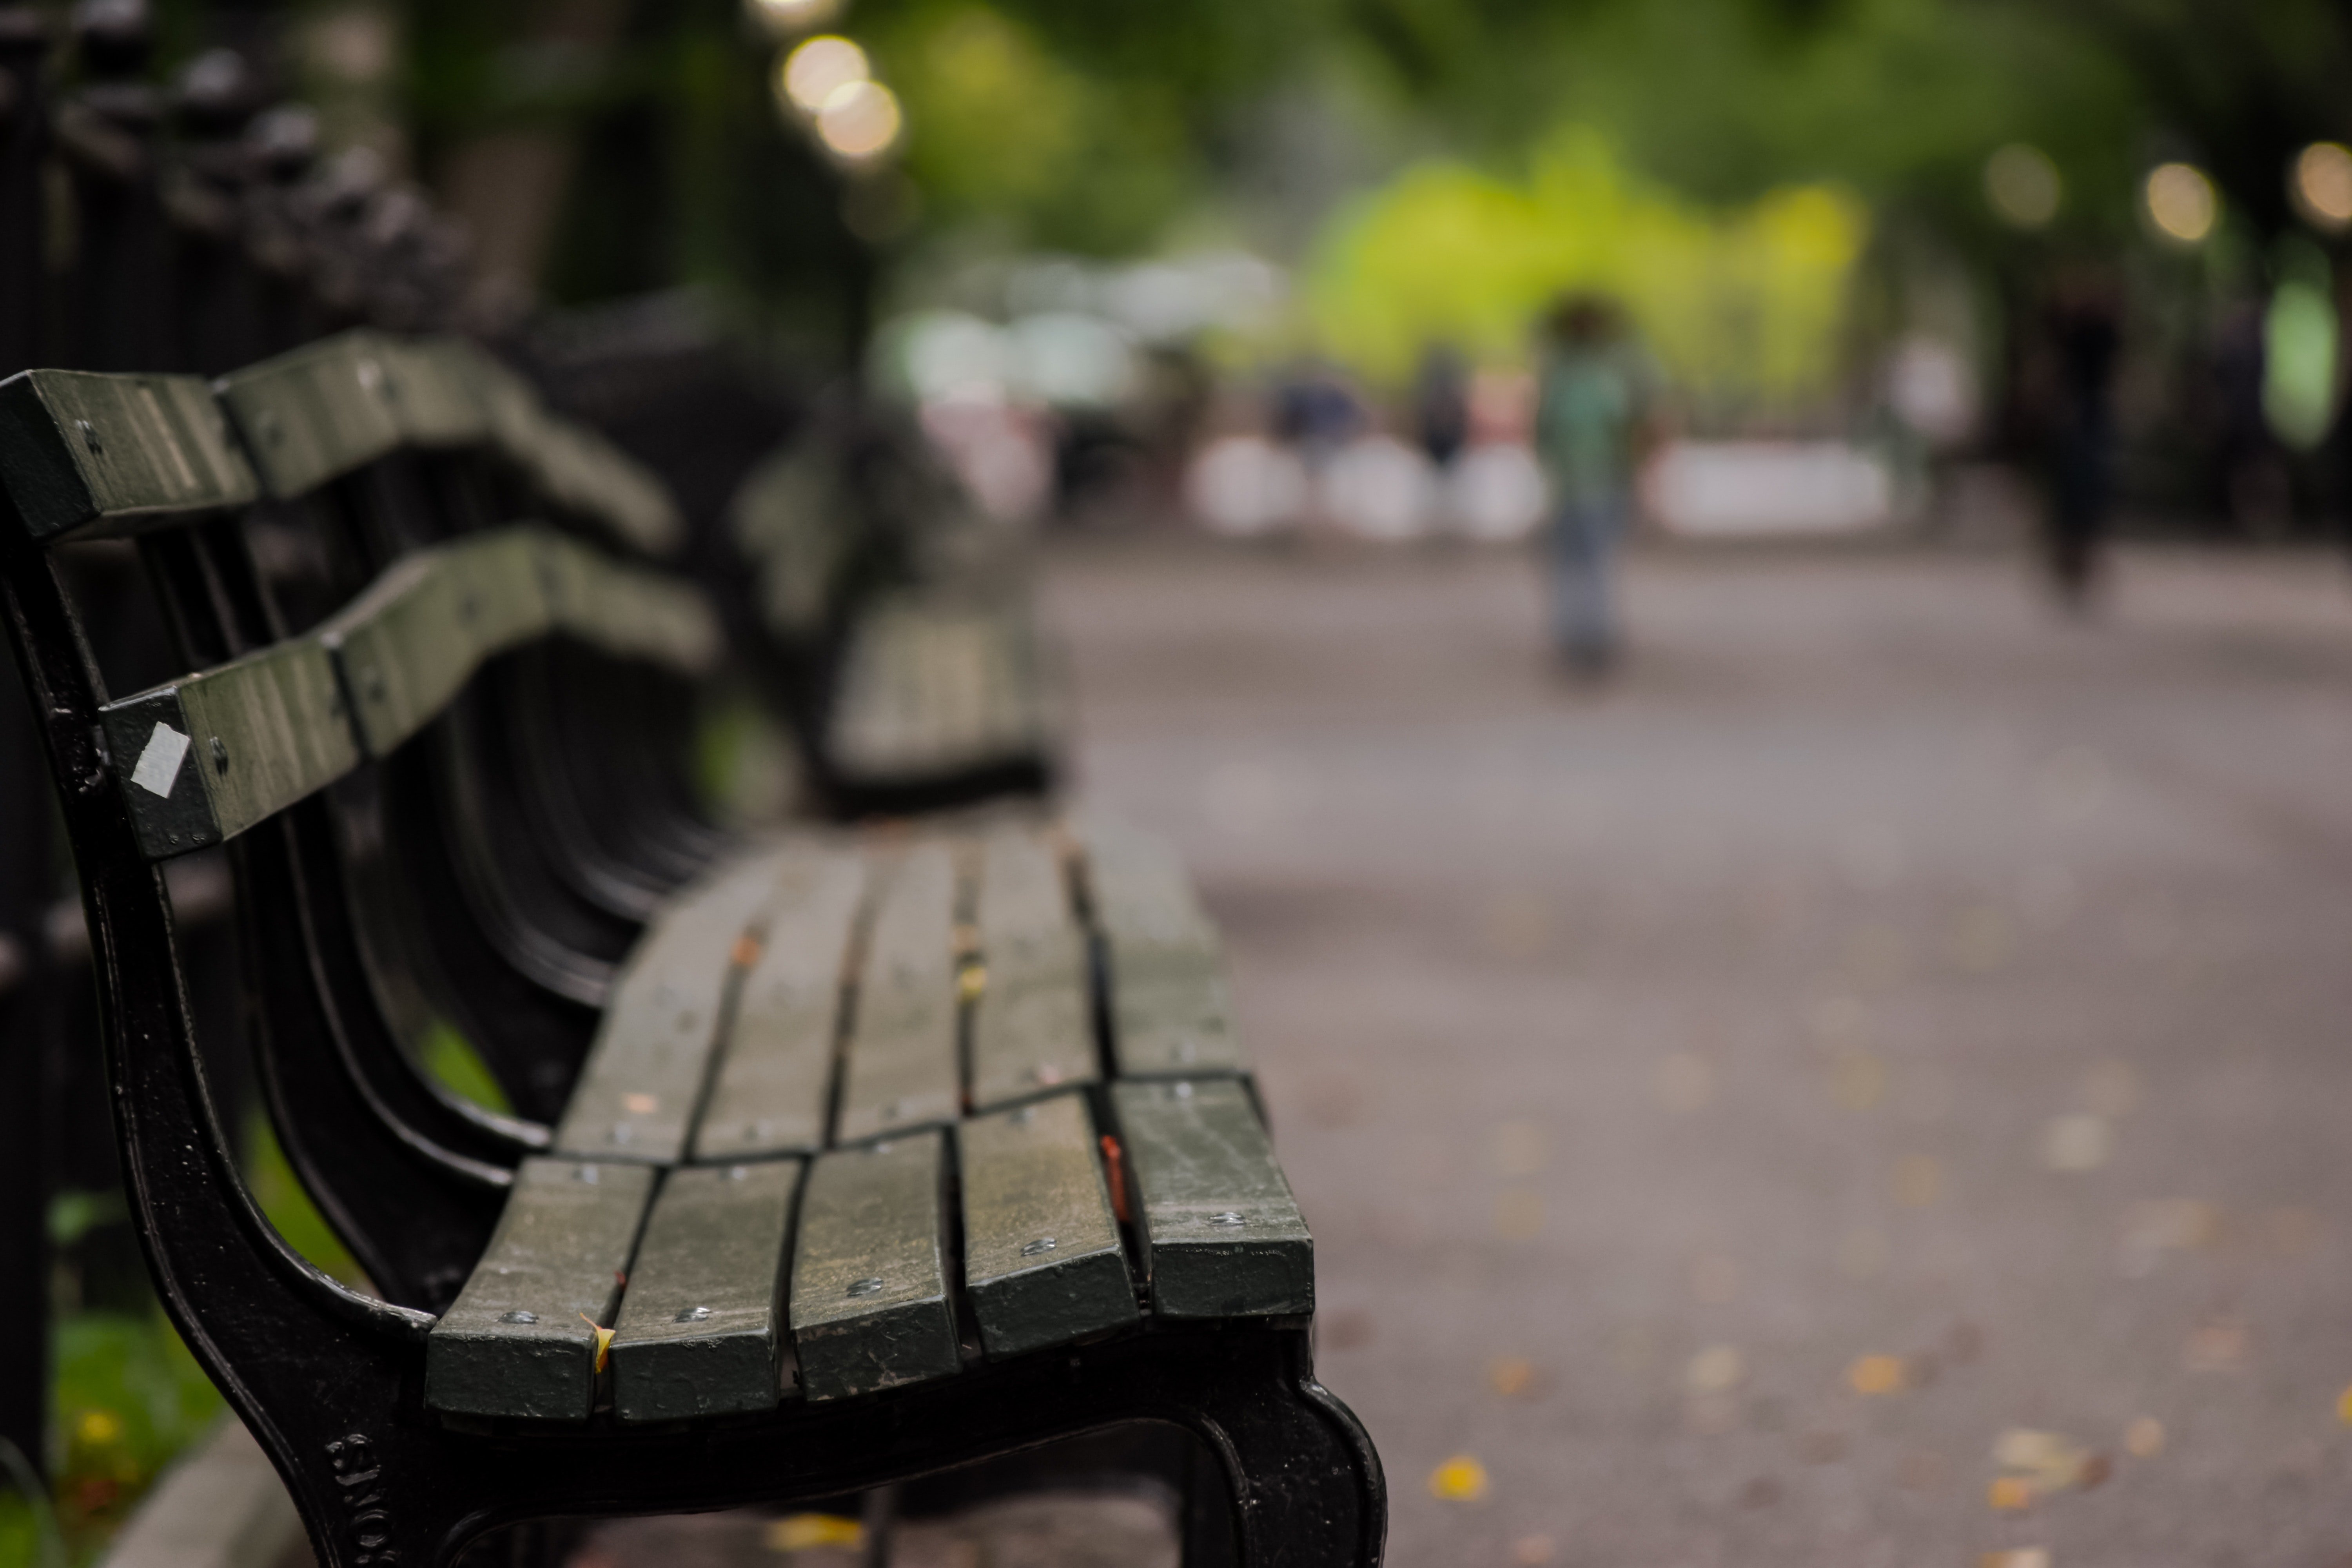 Jeremy ended up spending the night laying on a park bench after the hotel staff kicked him out. | Source: Pexels